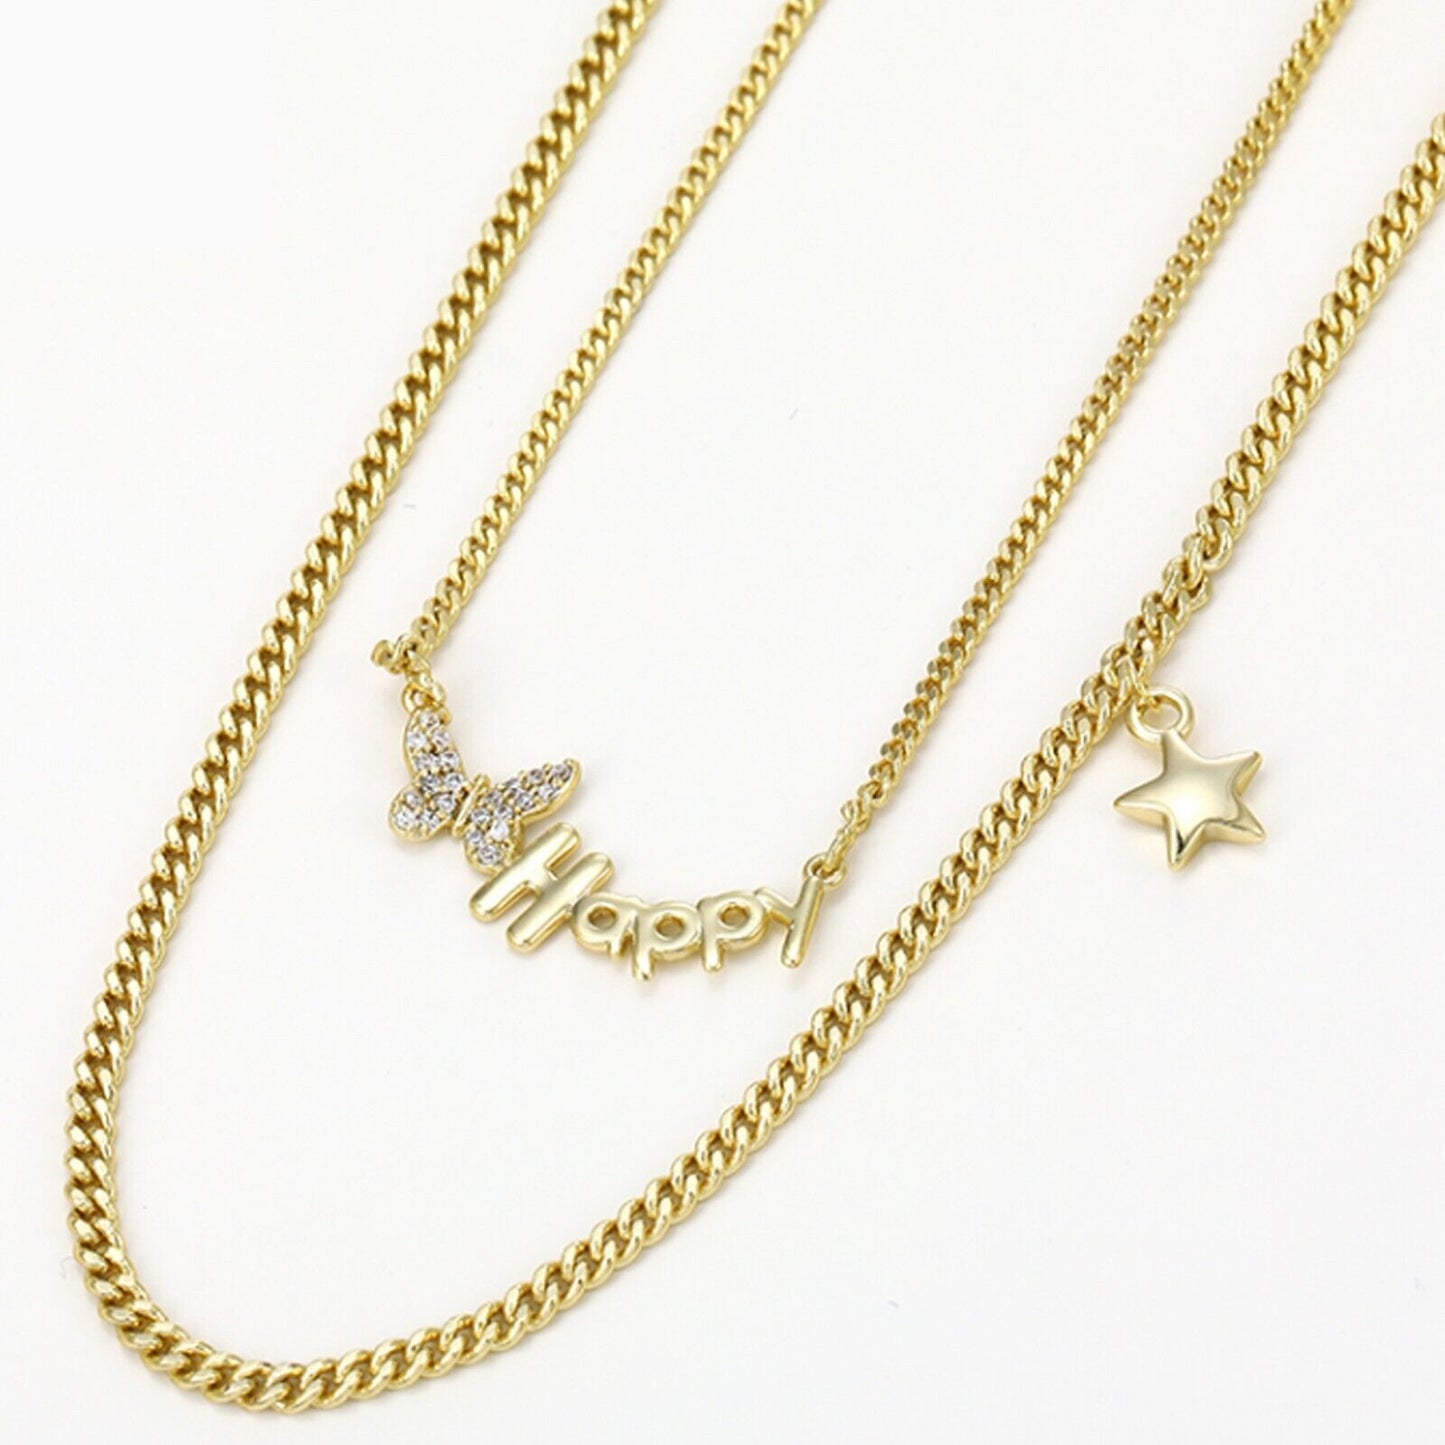 Necklaces - 14K Gold Plated. Happy Butterfly Star Double Layer Choker